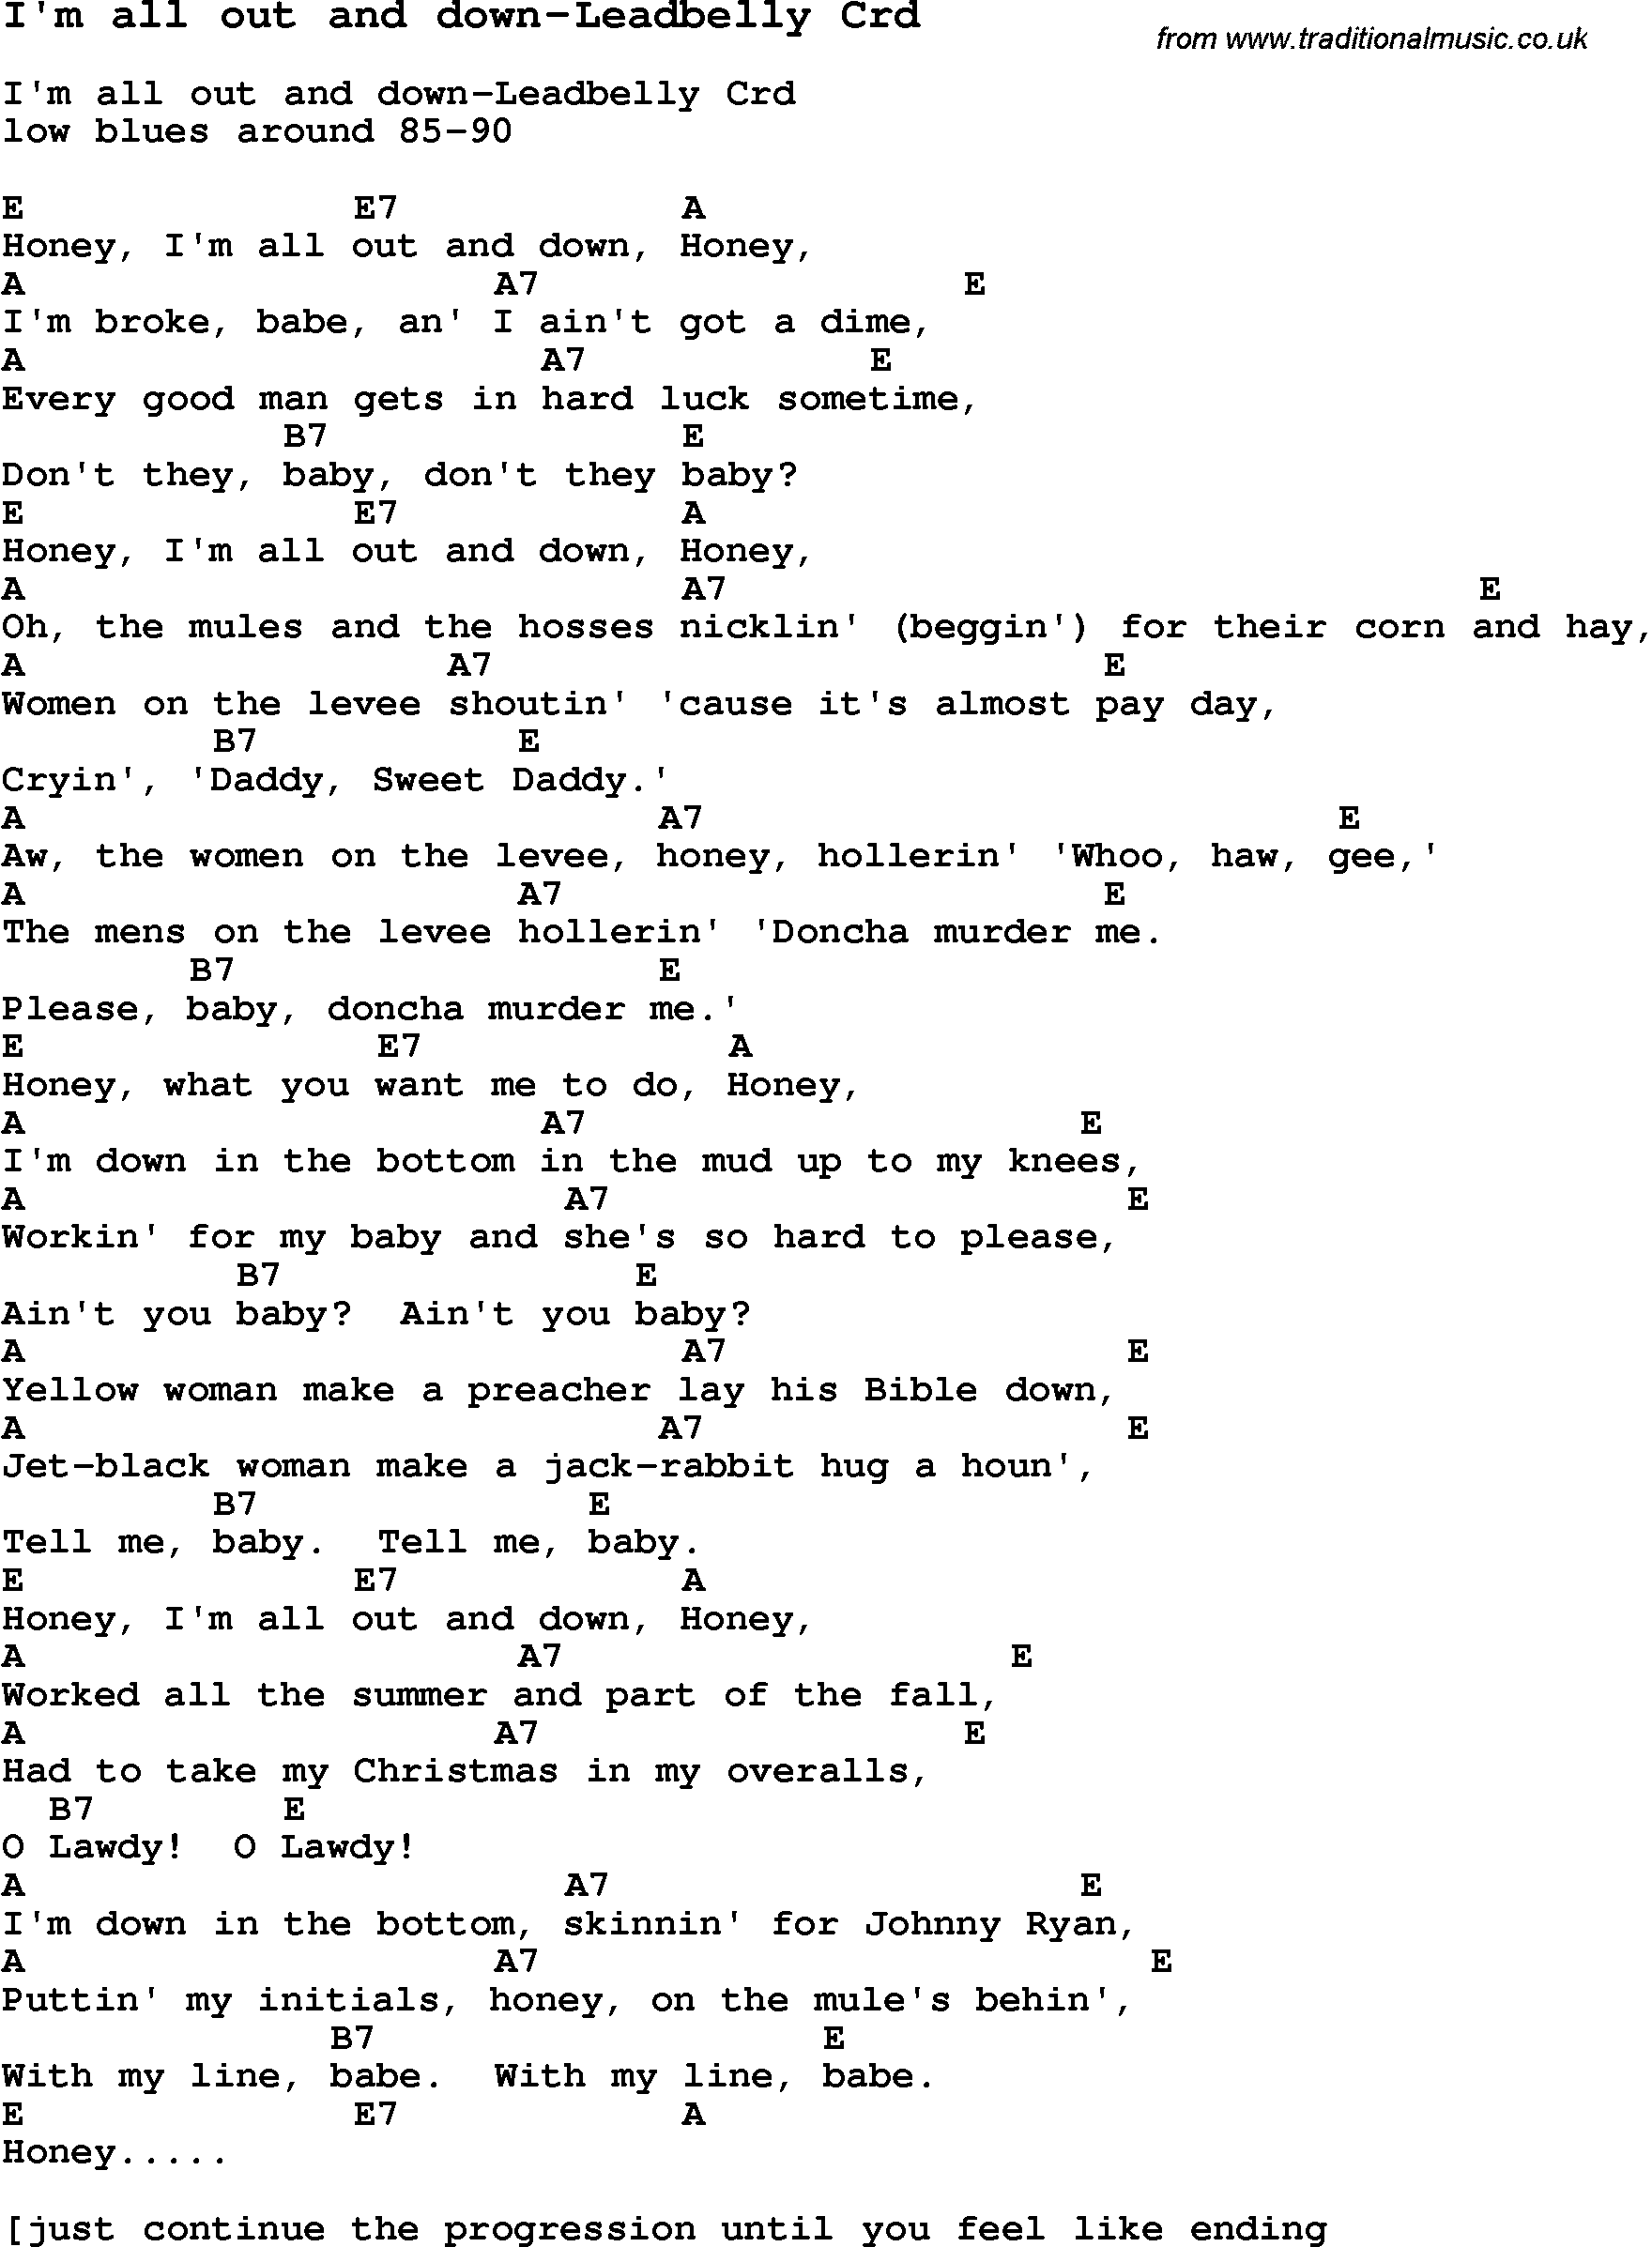 Skiffle Song Lyrics for I'm All Out And Down-Leadbelly with chords for Mandolin, Ukulele, Guitar, Banjo etc.